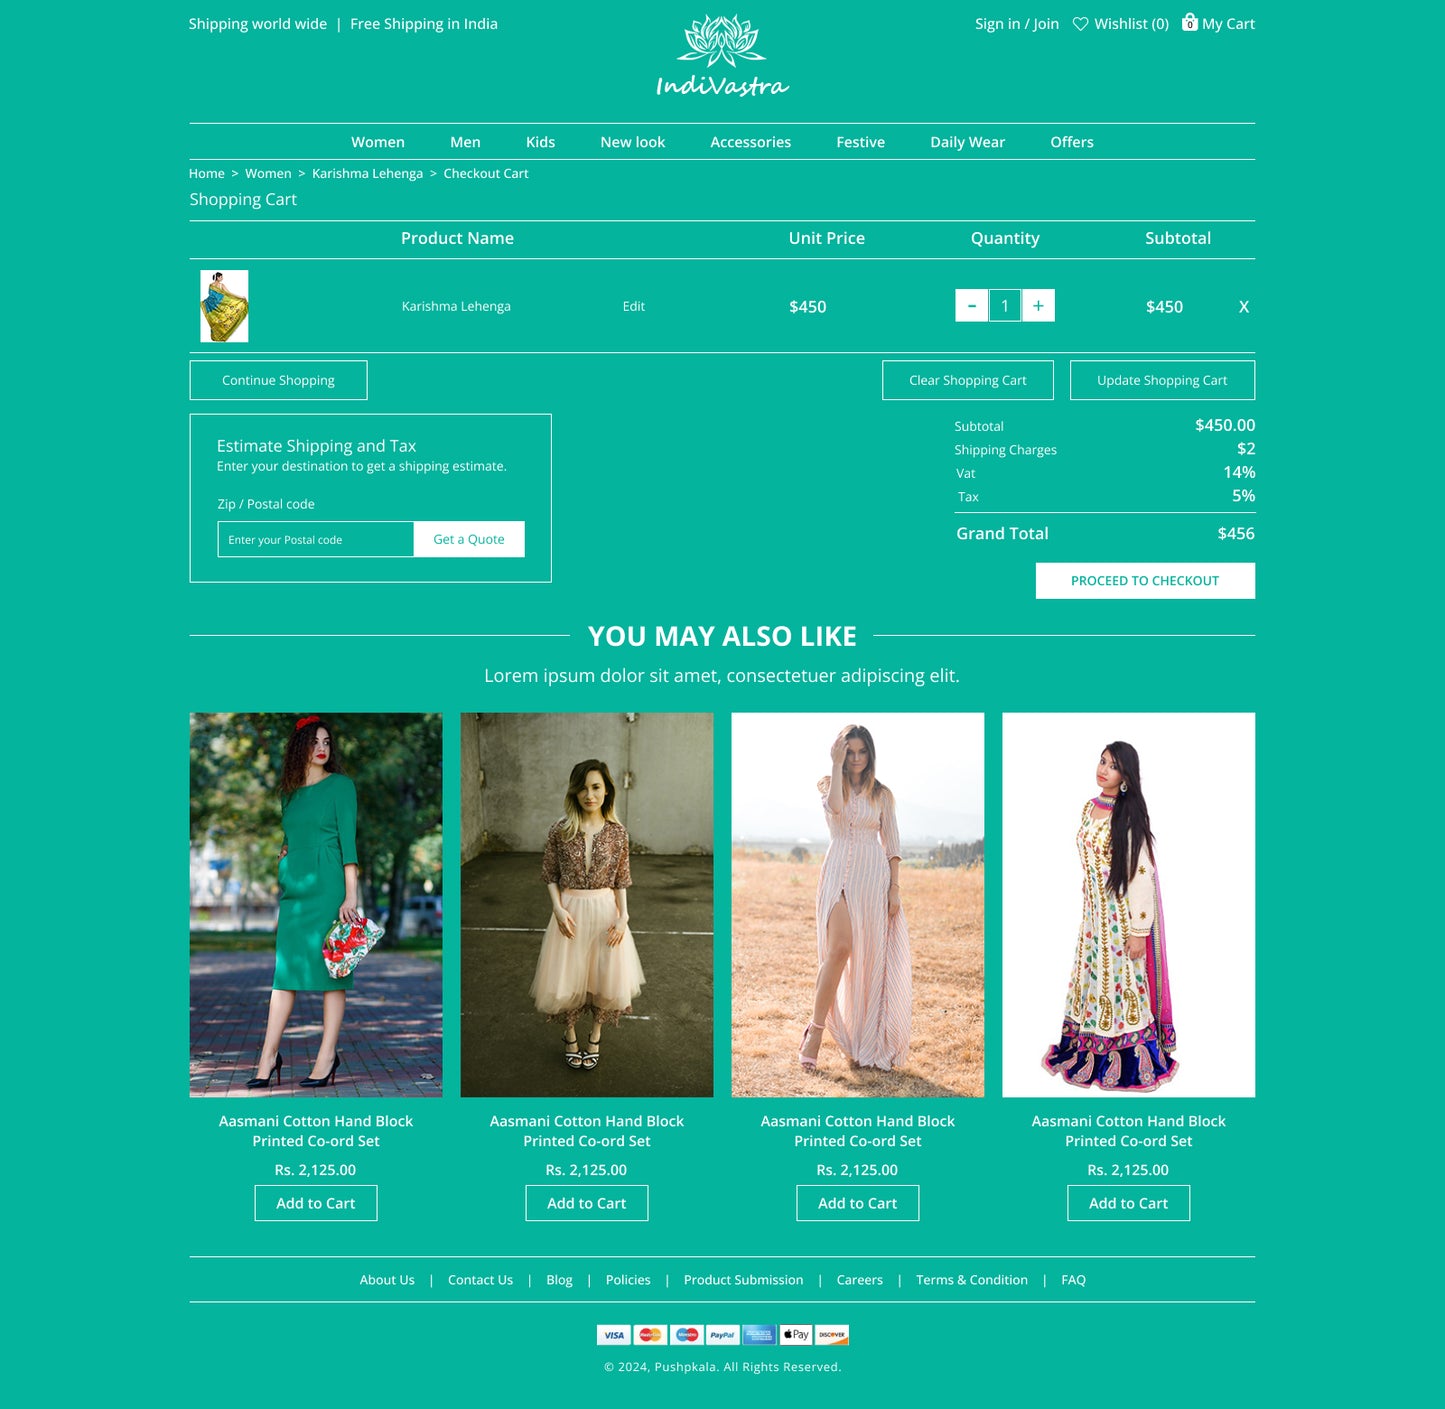 Indi Vastra - Responsive Ecommerce website PSD and figma template